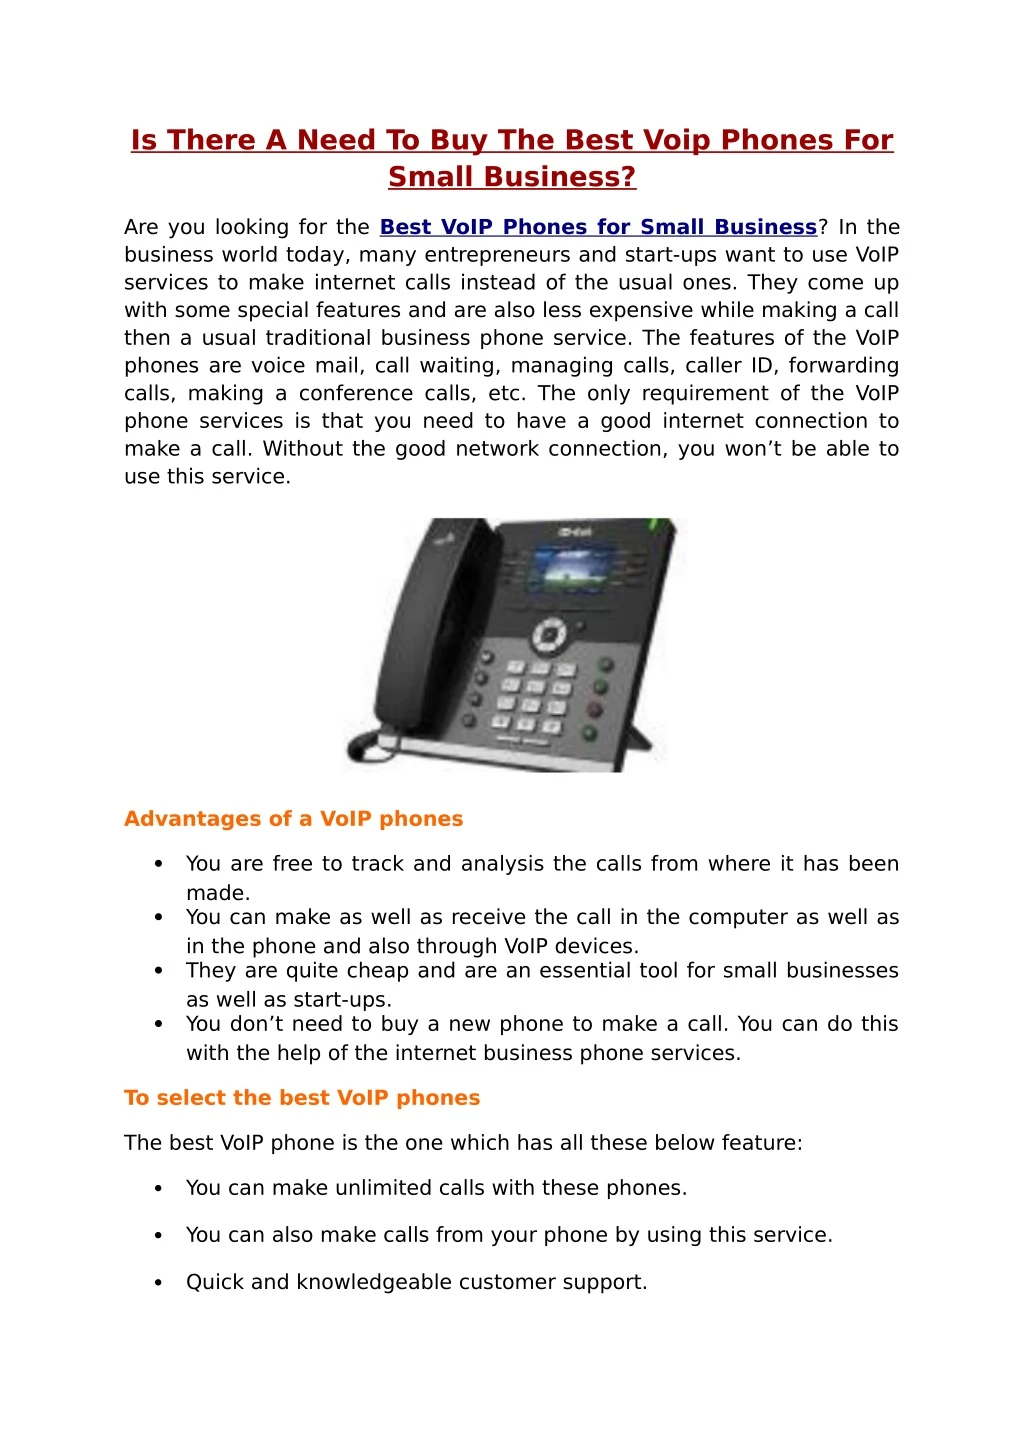 is there a need to buy the best voip phones